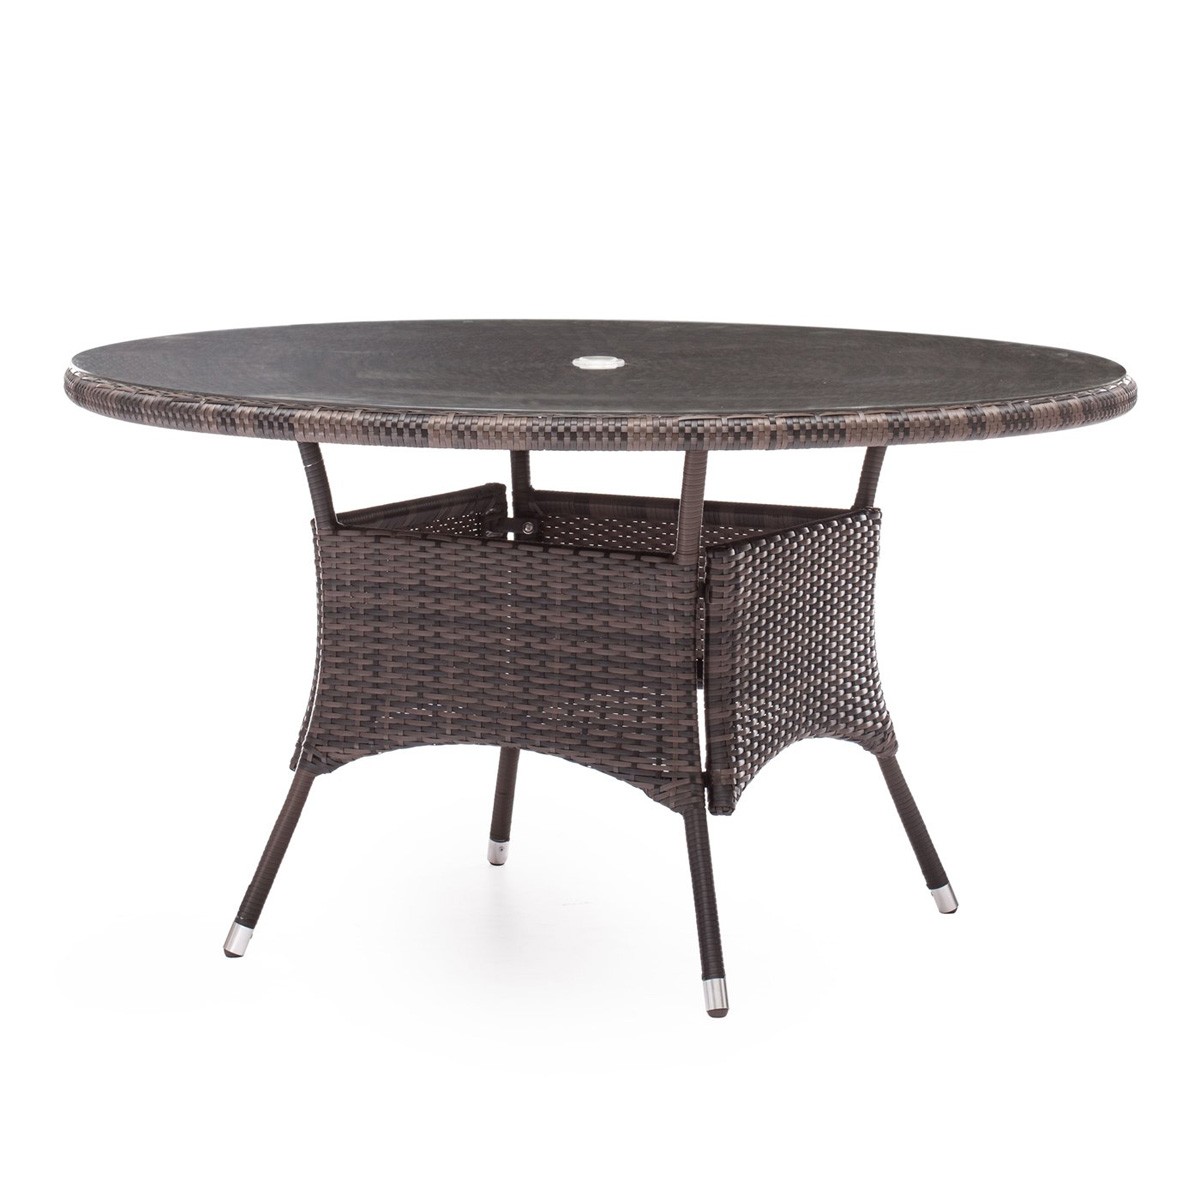 Zuo Modern South Bay Dining Table - Brown